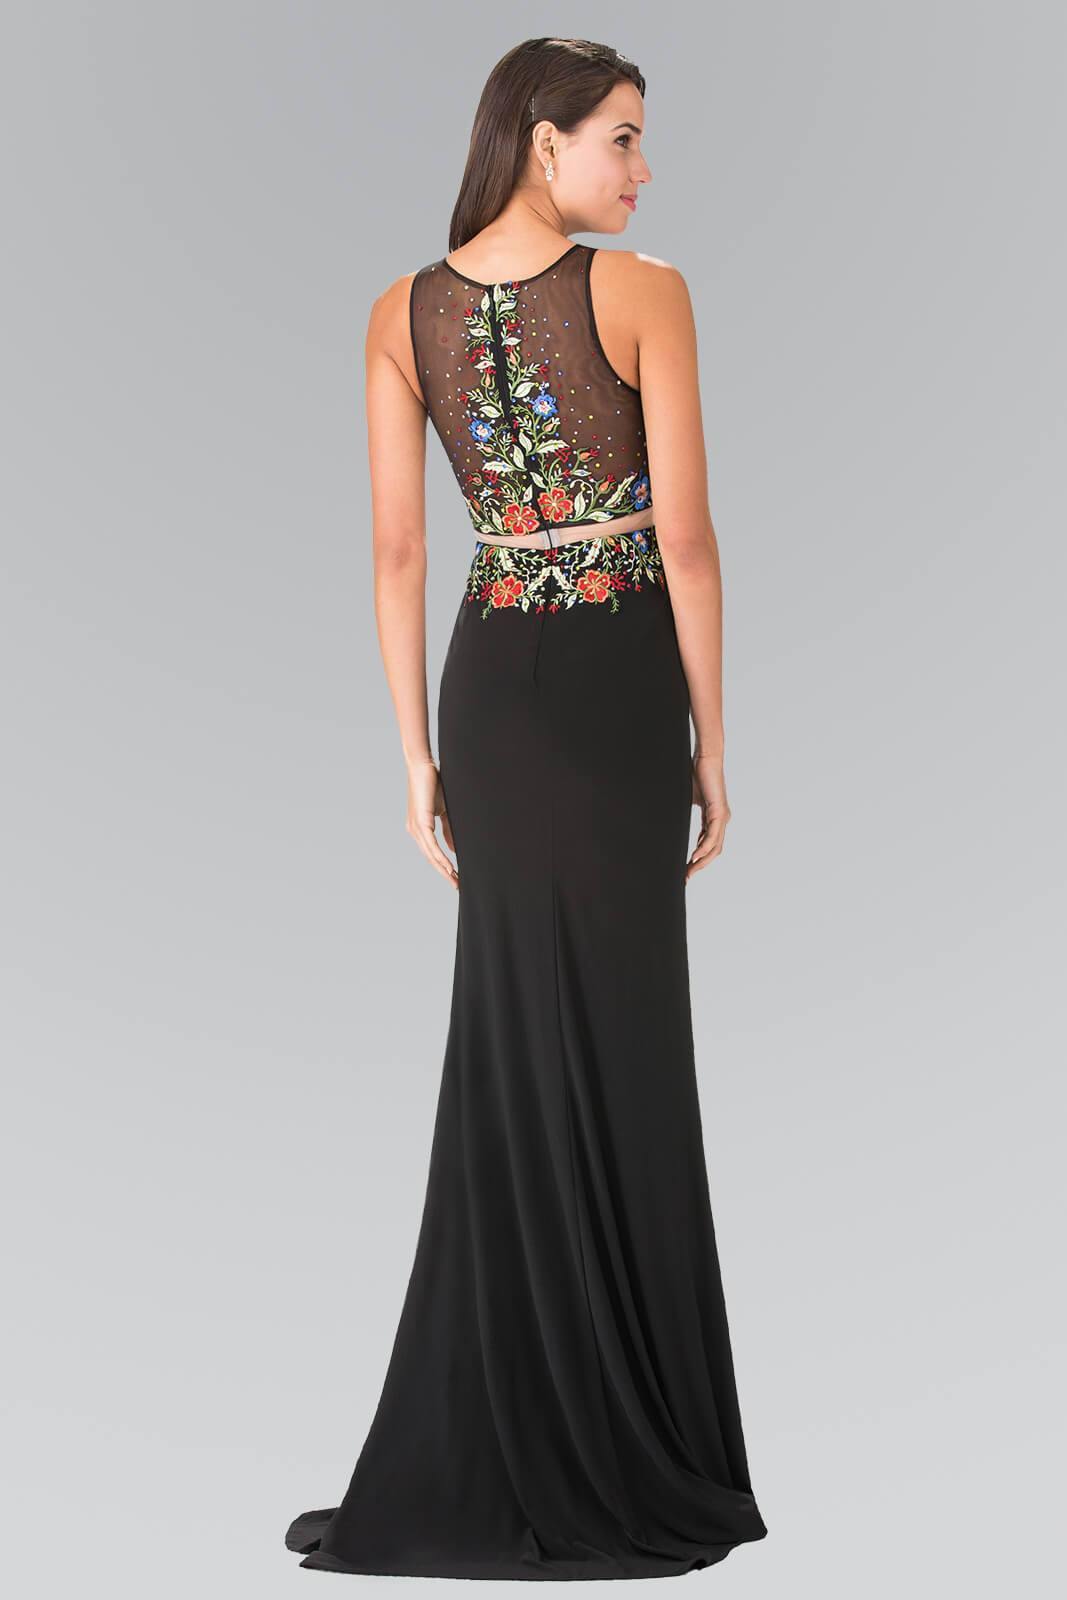 Prom Long Dress Evening Formal Gown Sale - The Dress Outlet